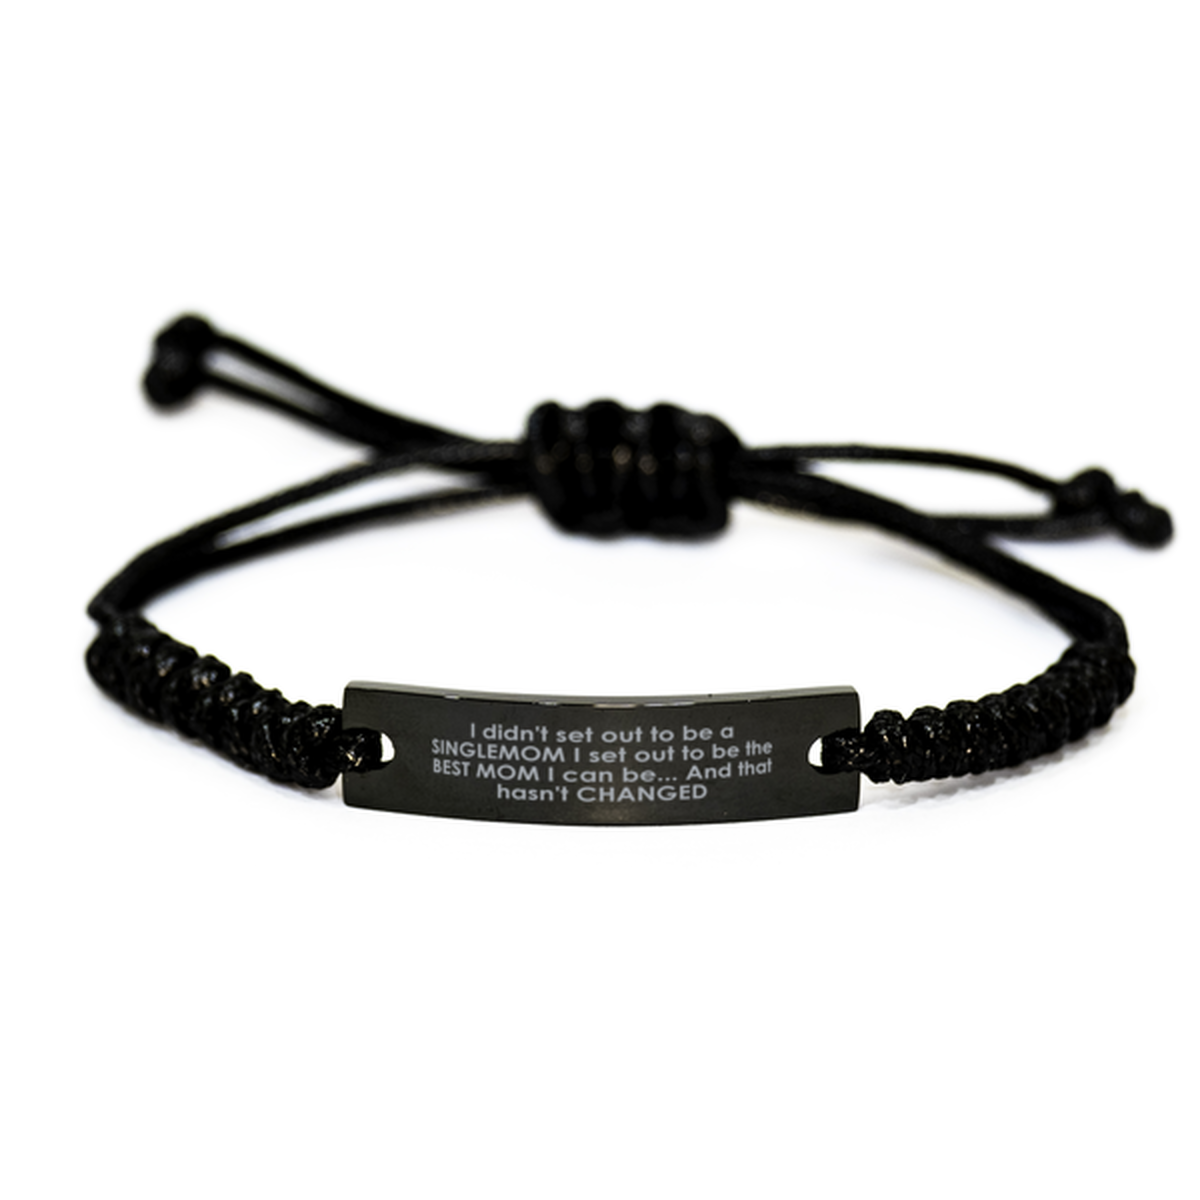 To My Single Mom Rope Bracelet, To Be The Best Mom, Valentines Gifts For Single Mom From Friends, Birthday Gifts For Women